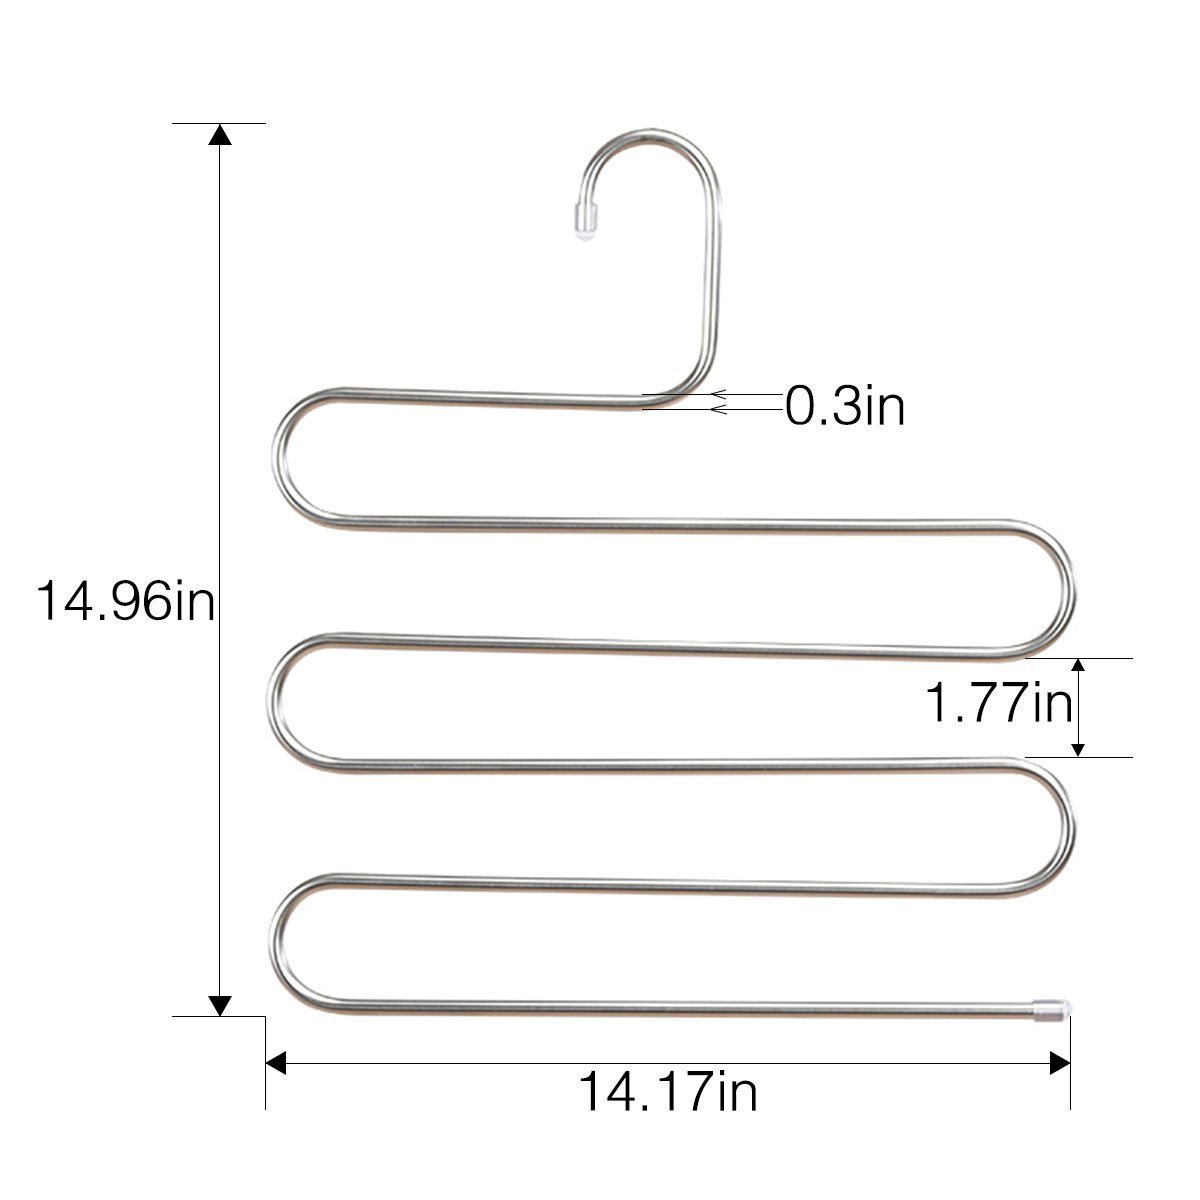 Best seller  doiown pants hangers s shape stainless steel clothes hangers space saving hangers closet organizer for pants jeans scarf5 layers 10pcs 1